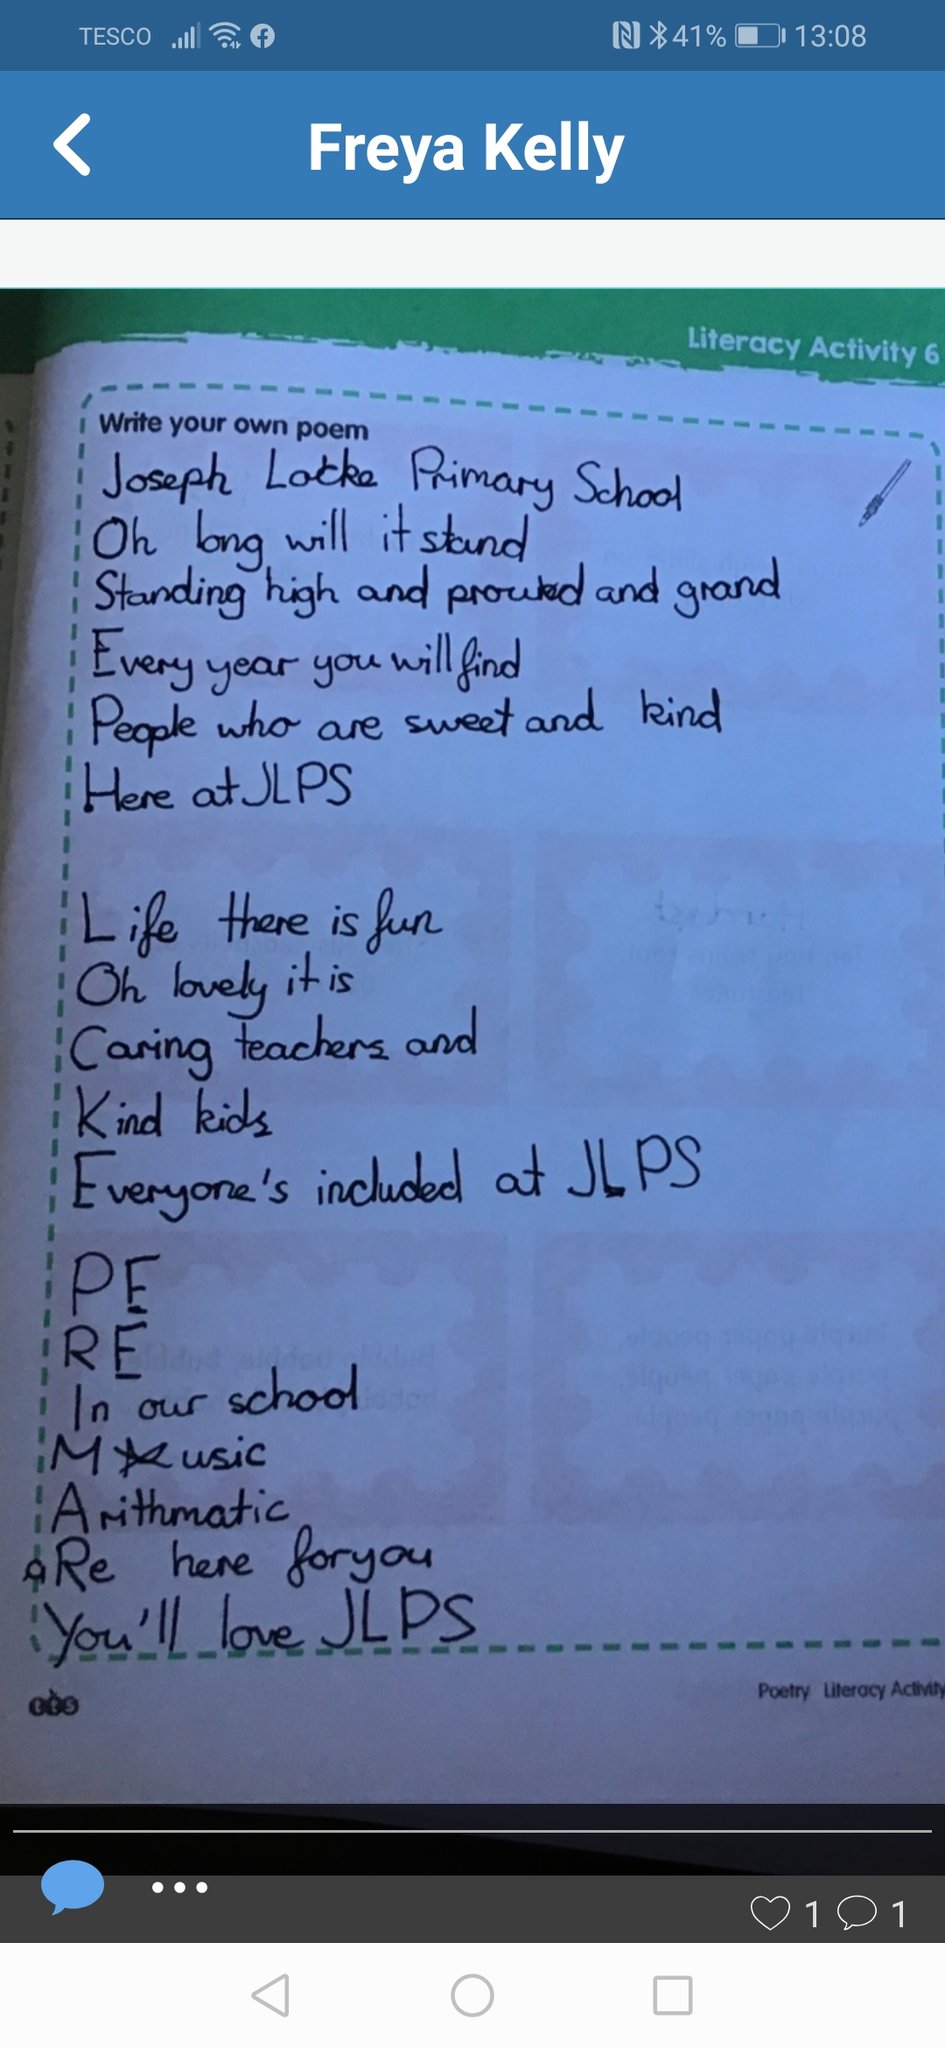 Andrea Kelly Freya S Acrostic Poem Part Of Her Home Learning About Jlps Mrsbrockjlps